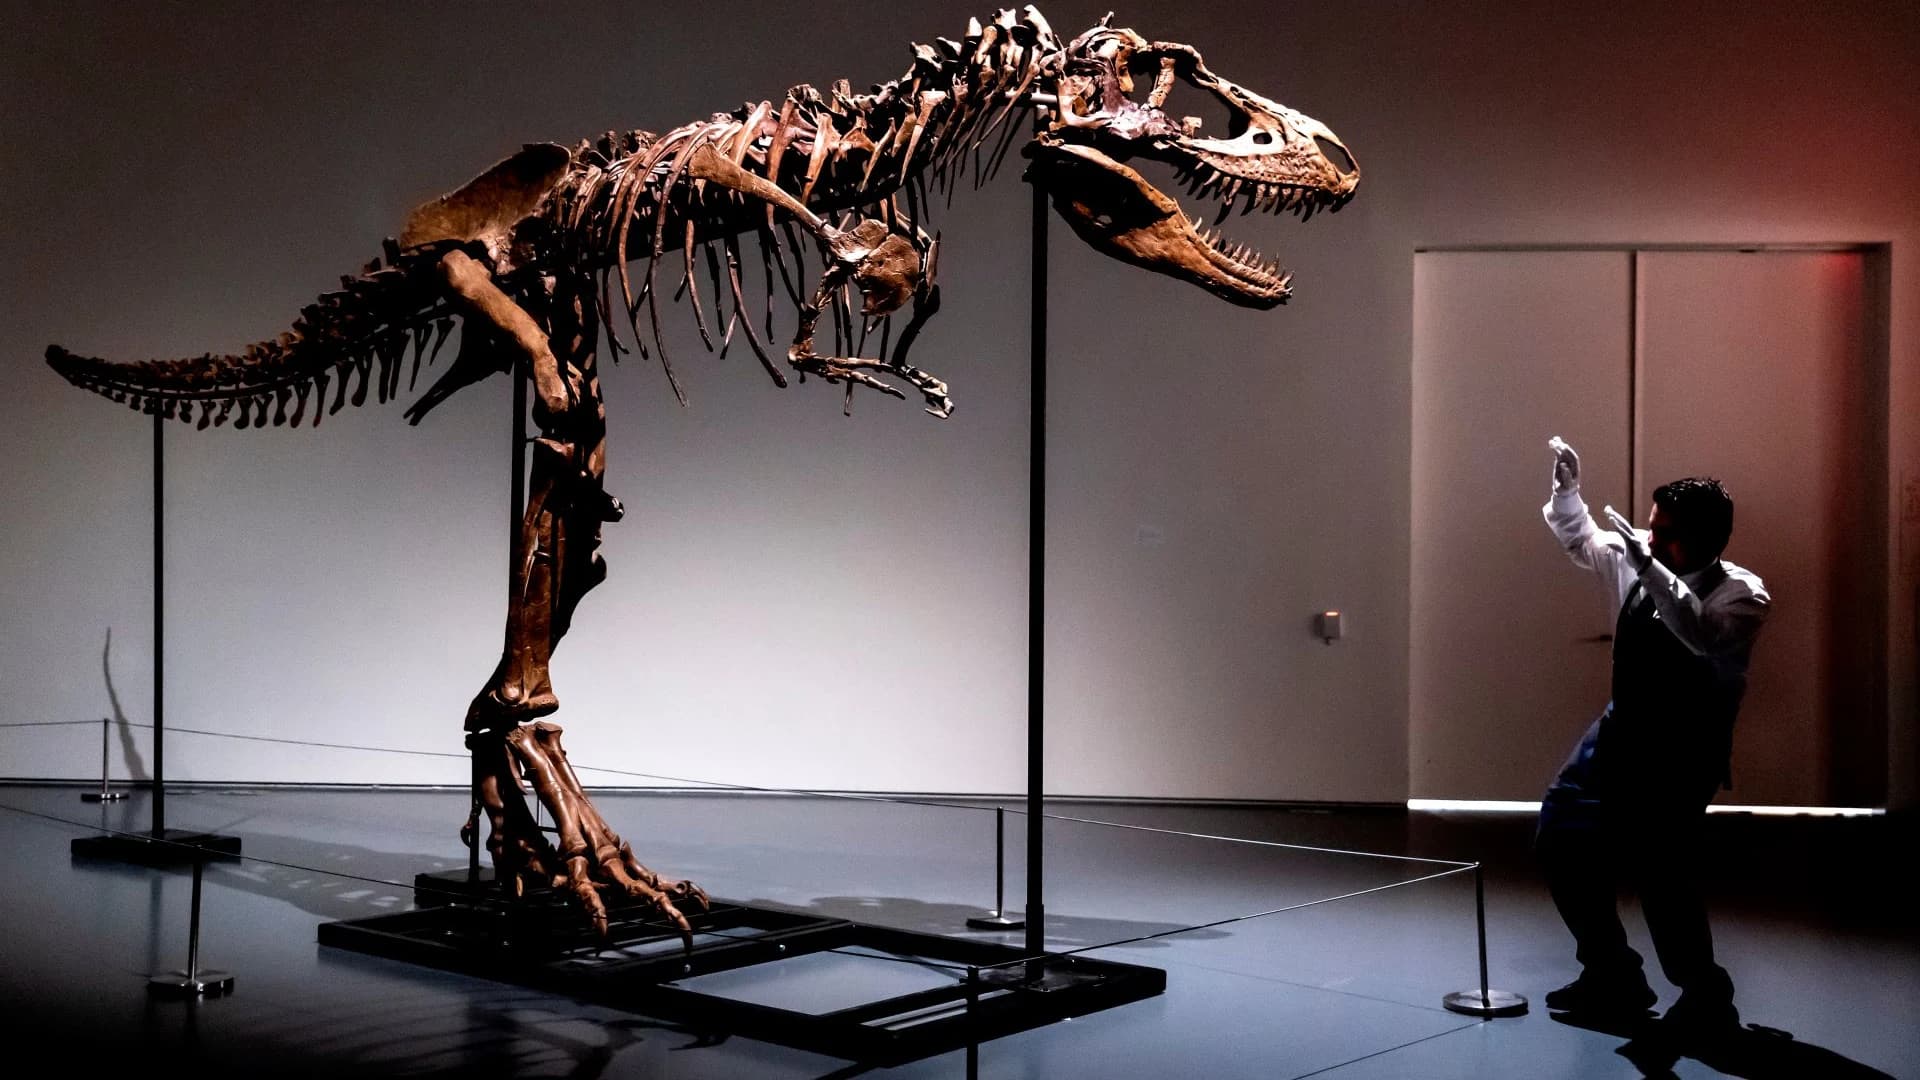 What's Hot! 76 million-year-old dinosaur skeleton to be auctioned in NYC